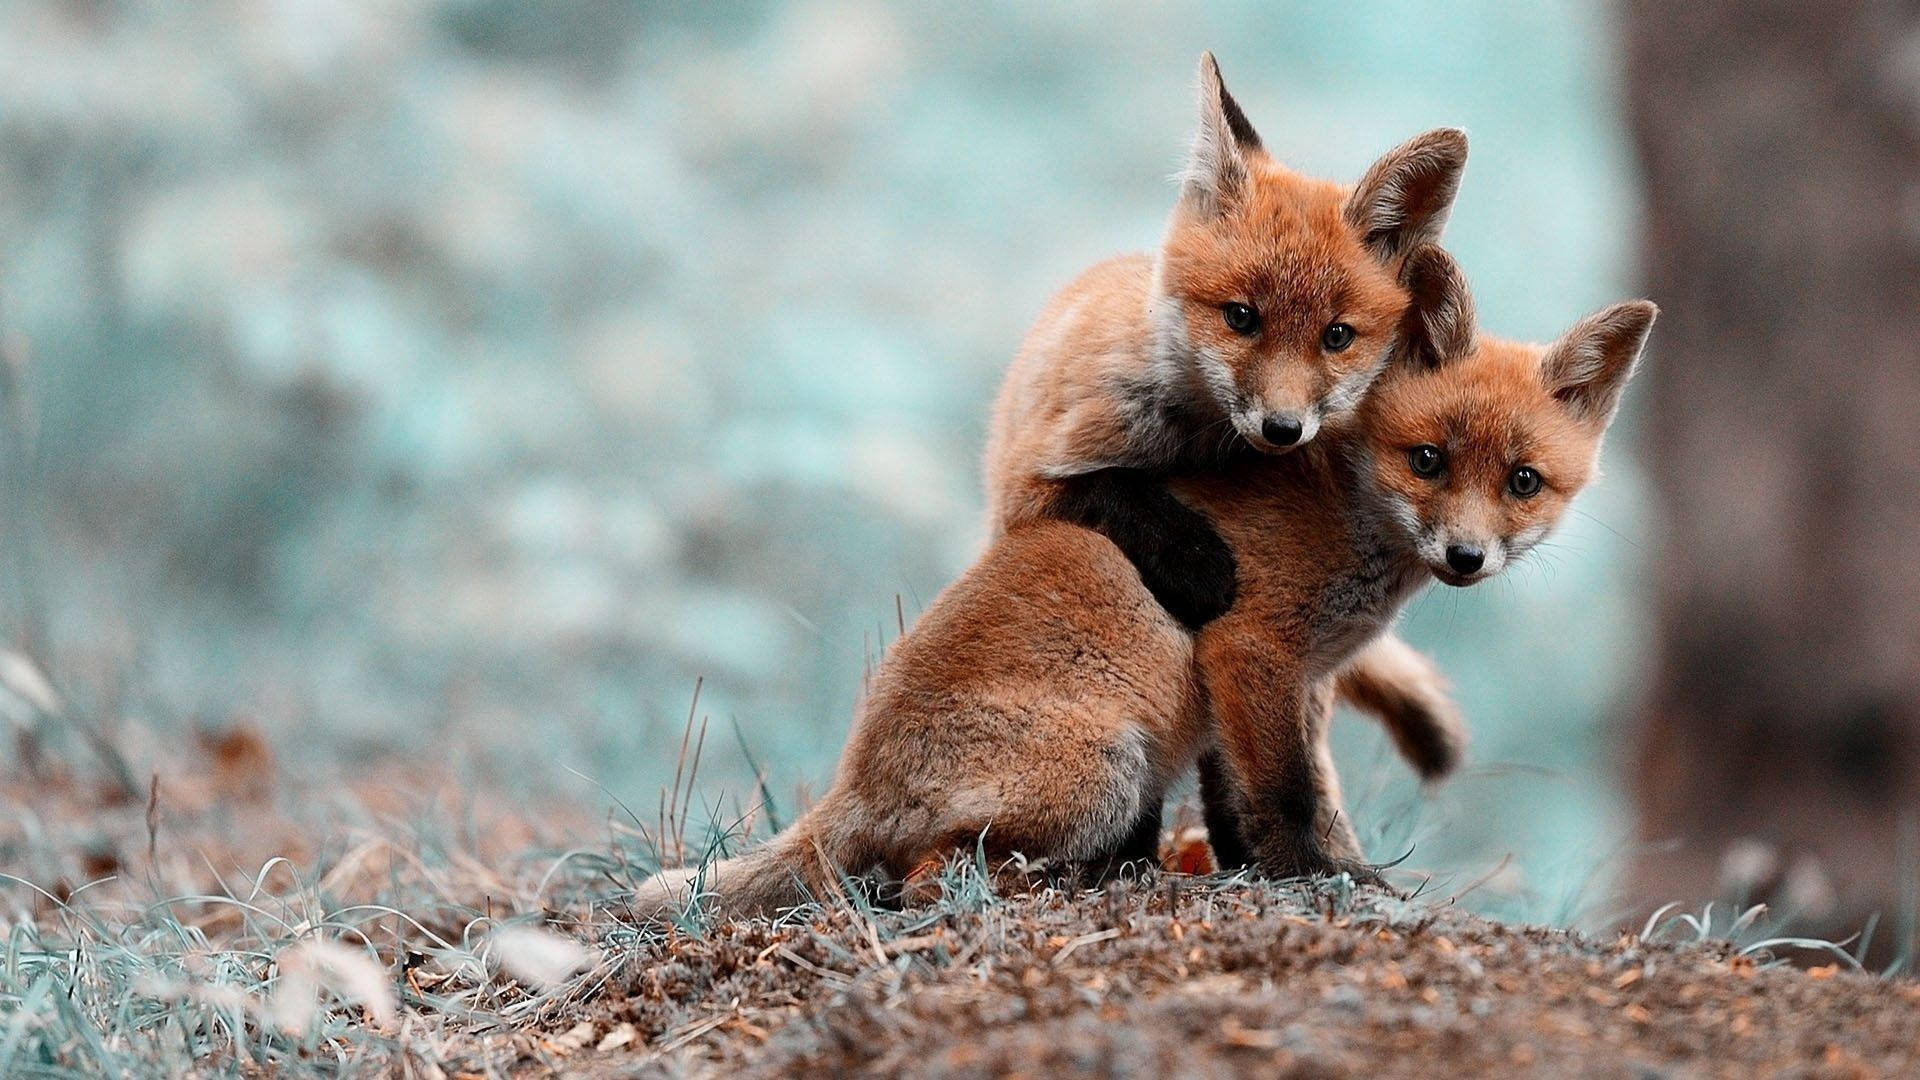 Baby Animals Foxes In The Woods Background